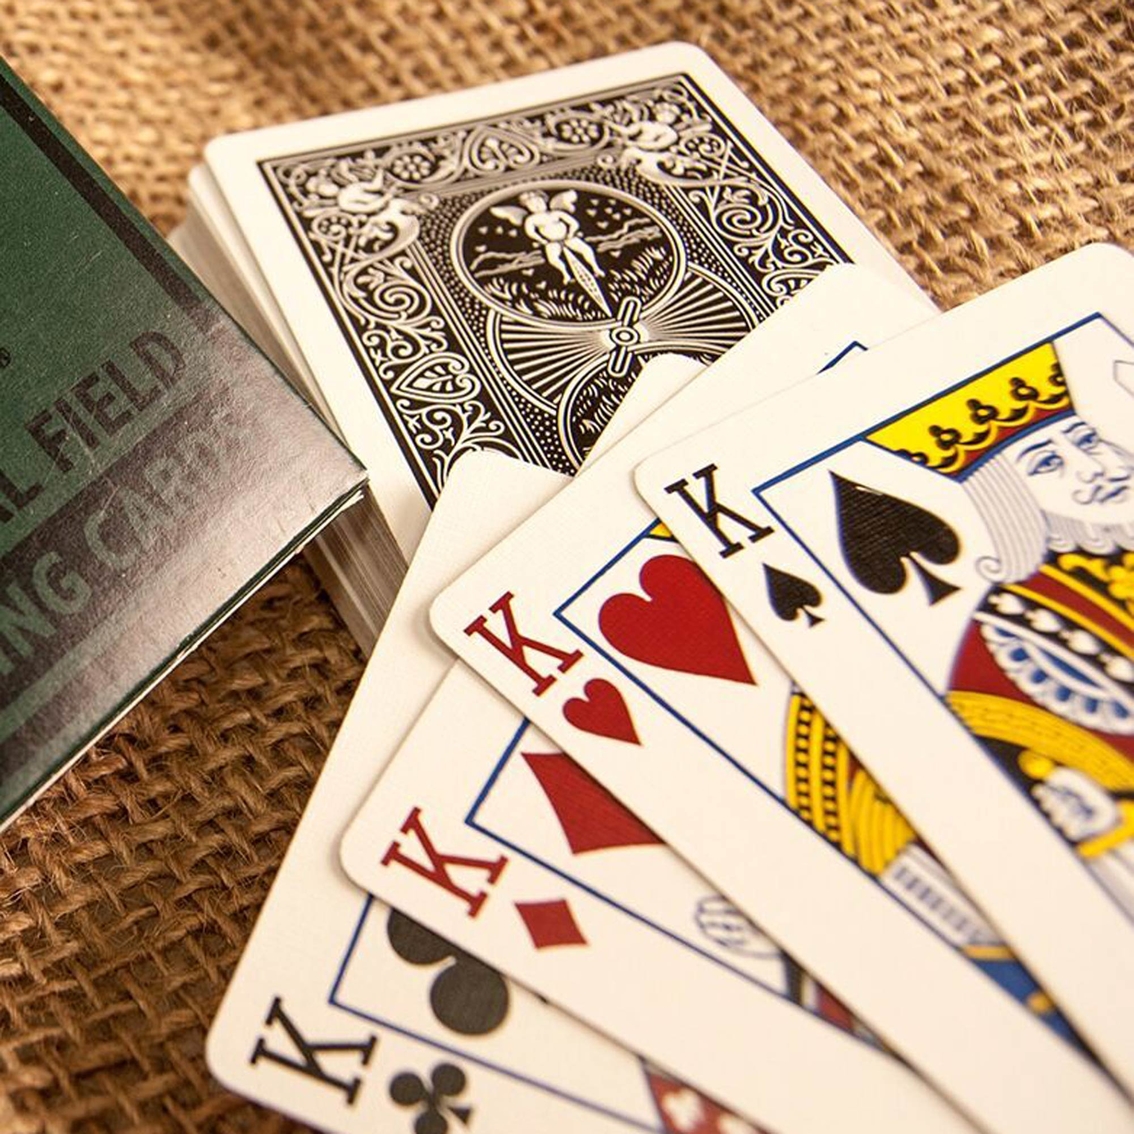 Bicycle US Tactical Field Playing Cards - Image 3 of 4